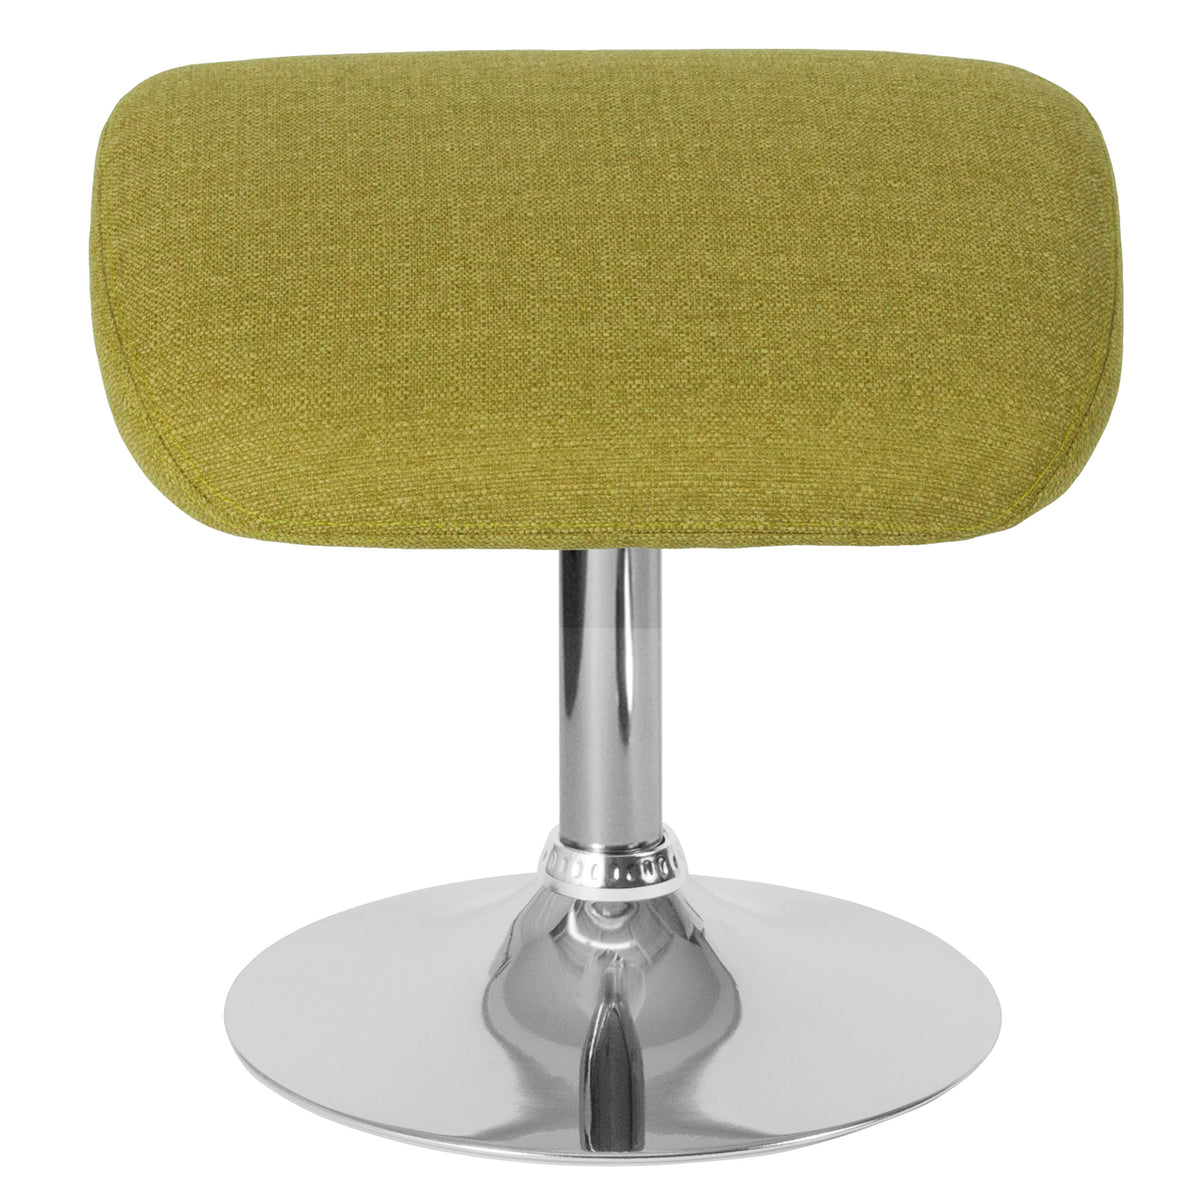 Green Fabric |#| Green Fabric Ottoman Footrest with Chrome Base - Living Room Furniture